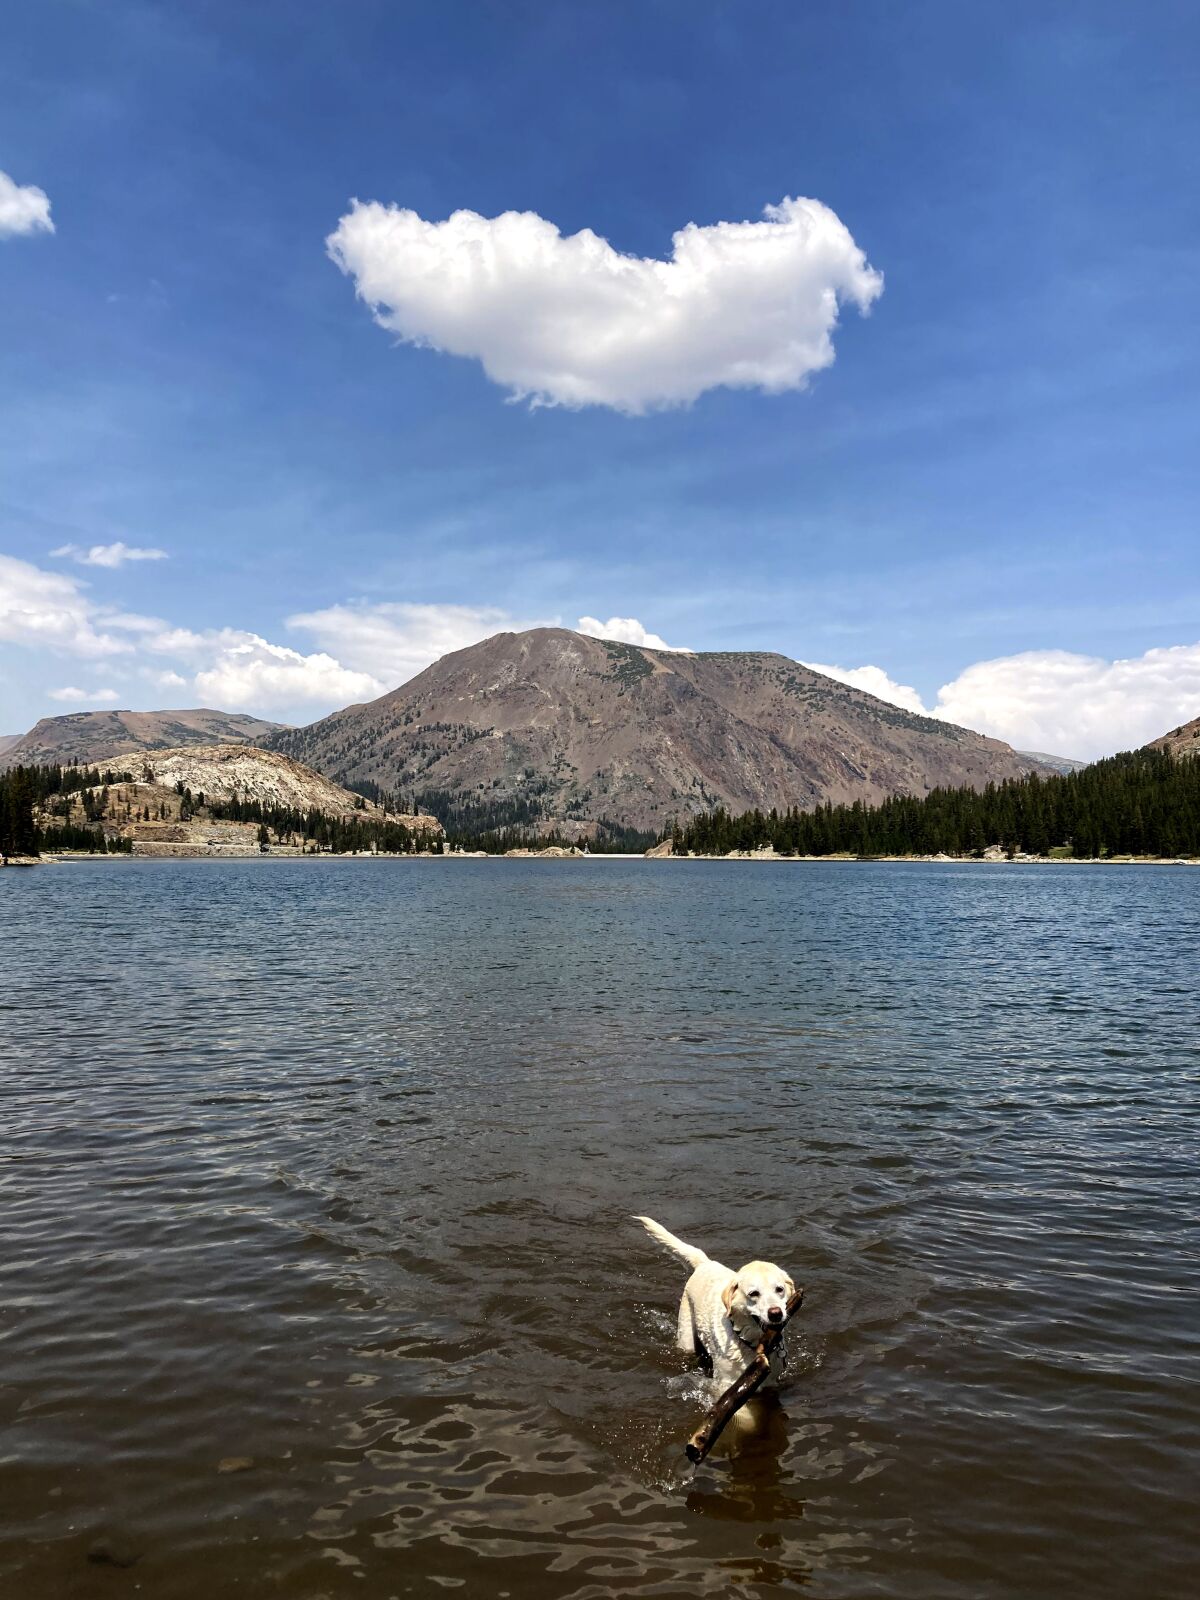 Murphy at Tioga Lake in front of mountains that until recent years had snow year-round.